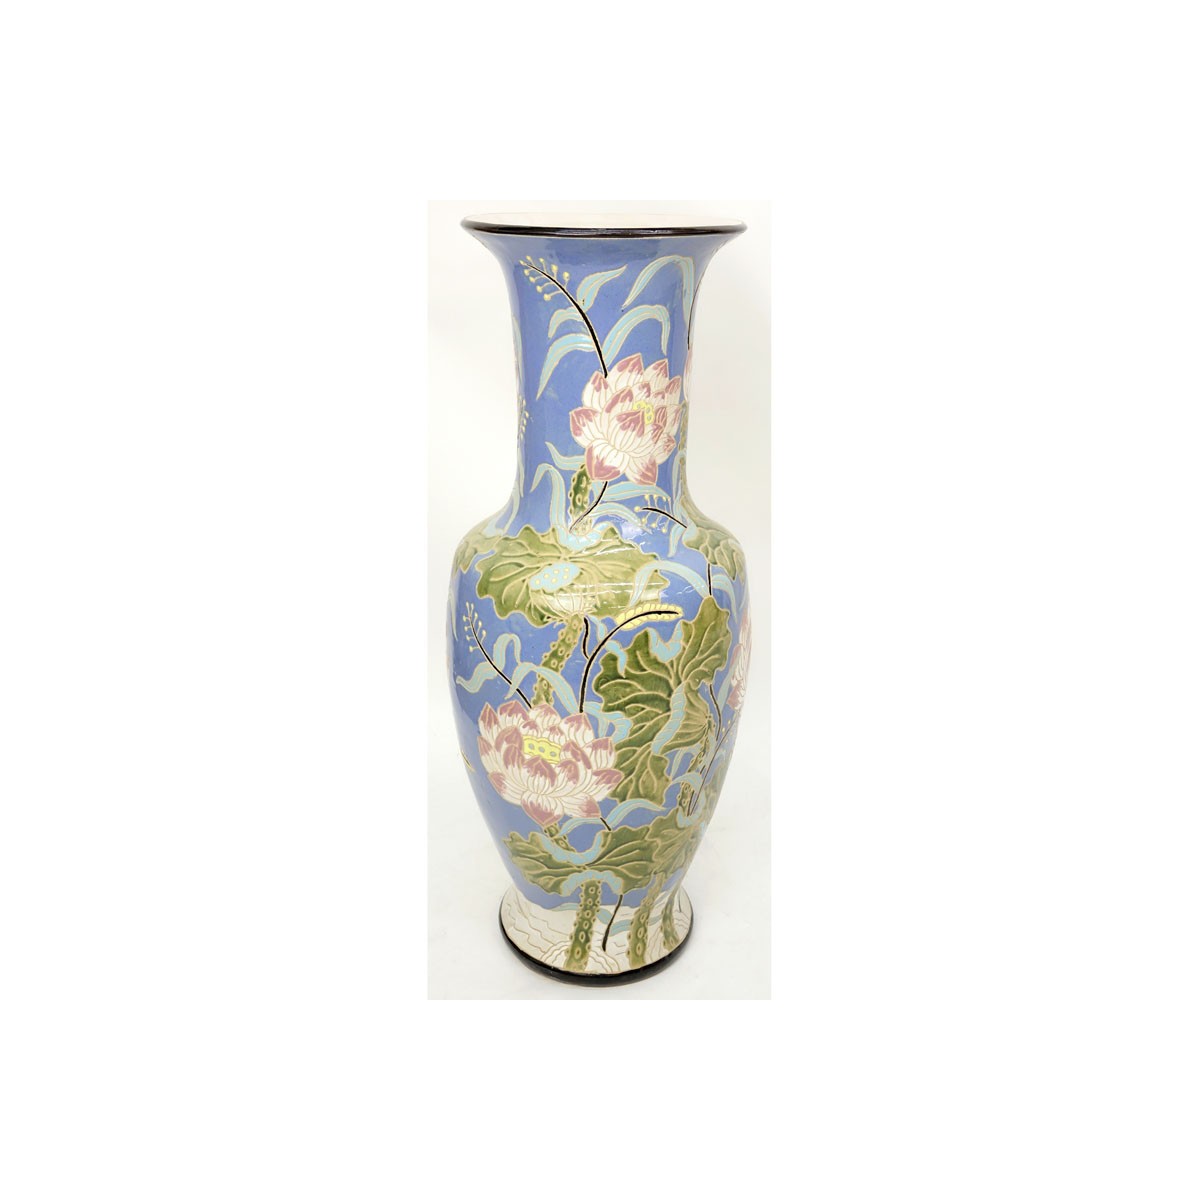 Monumental Majolica Pottery Vase. Features Asian i